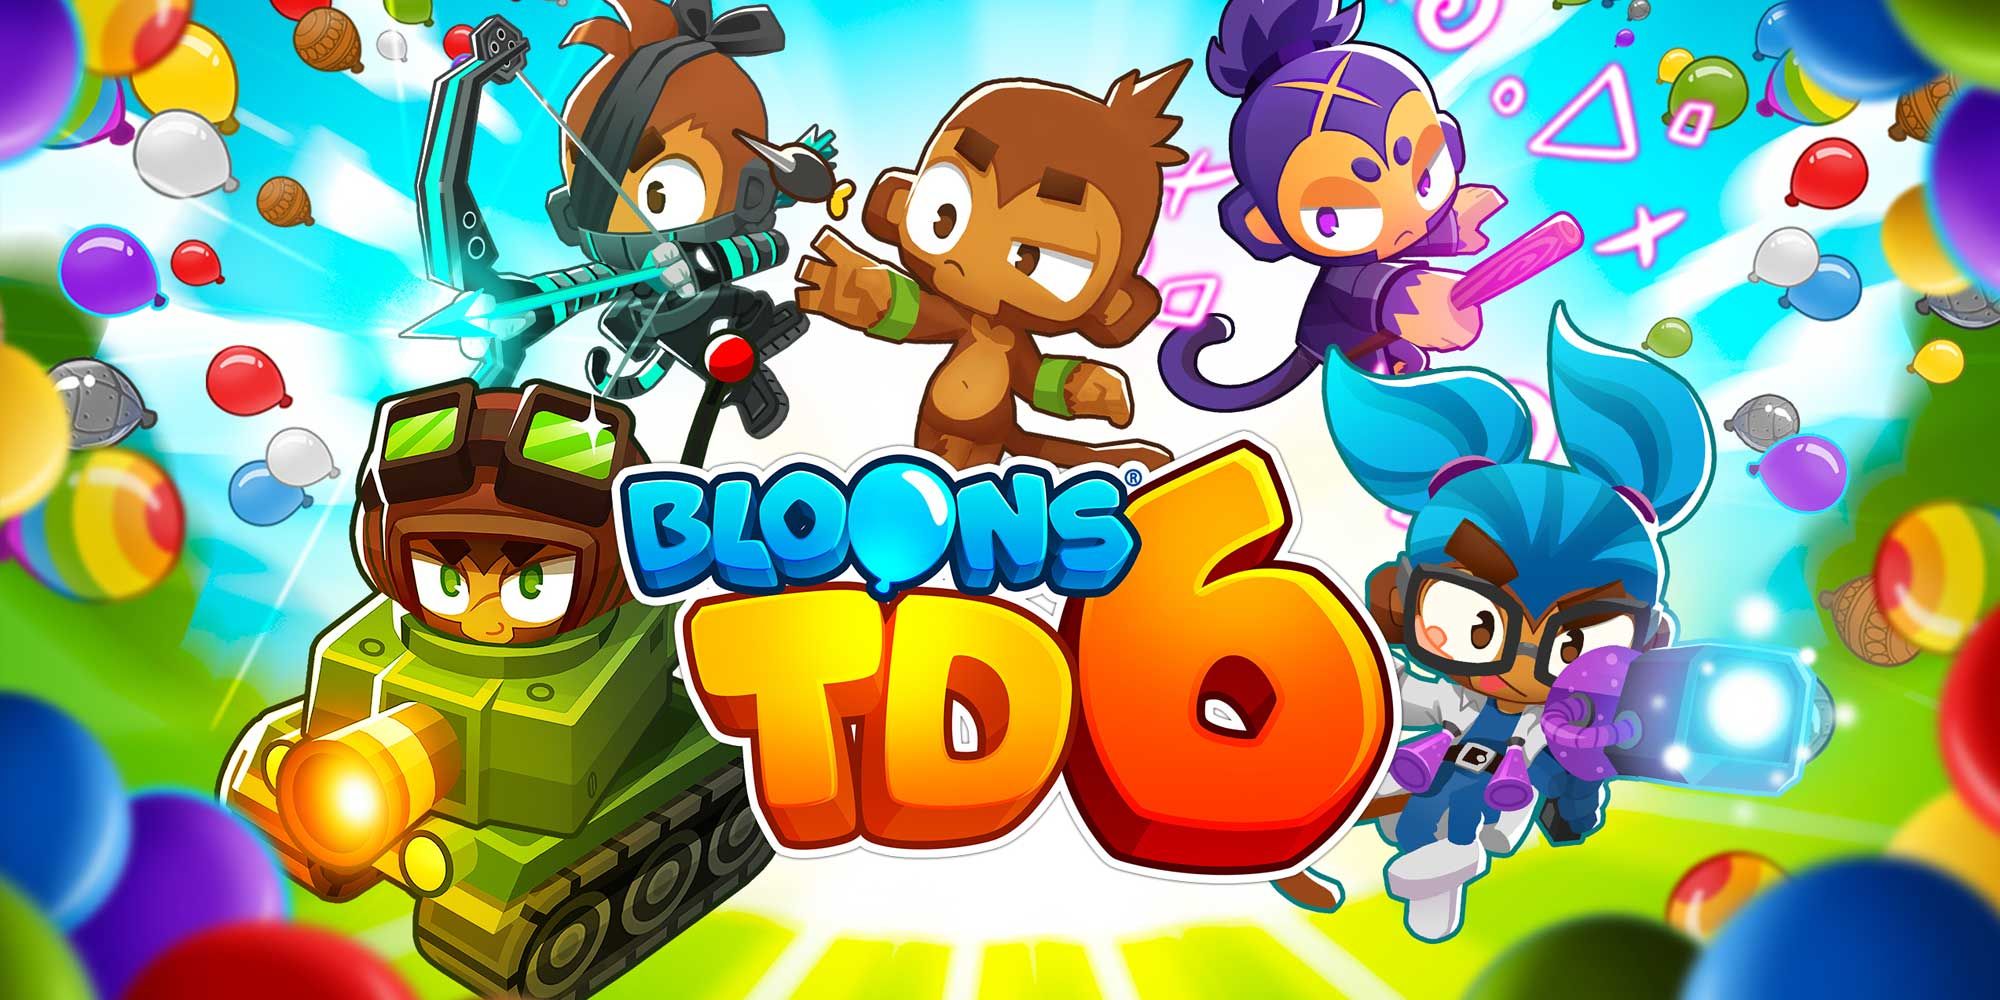 bloons tower defense 5 unnamed games